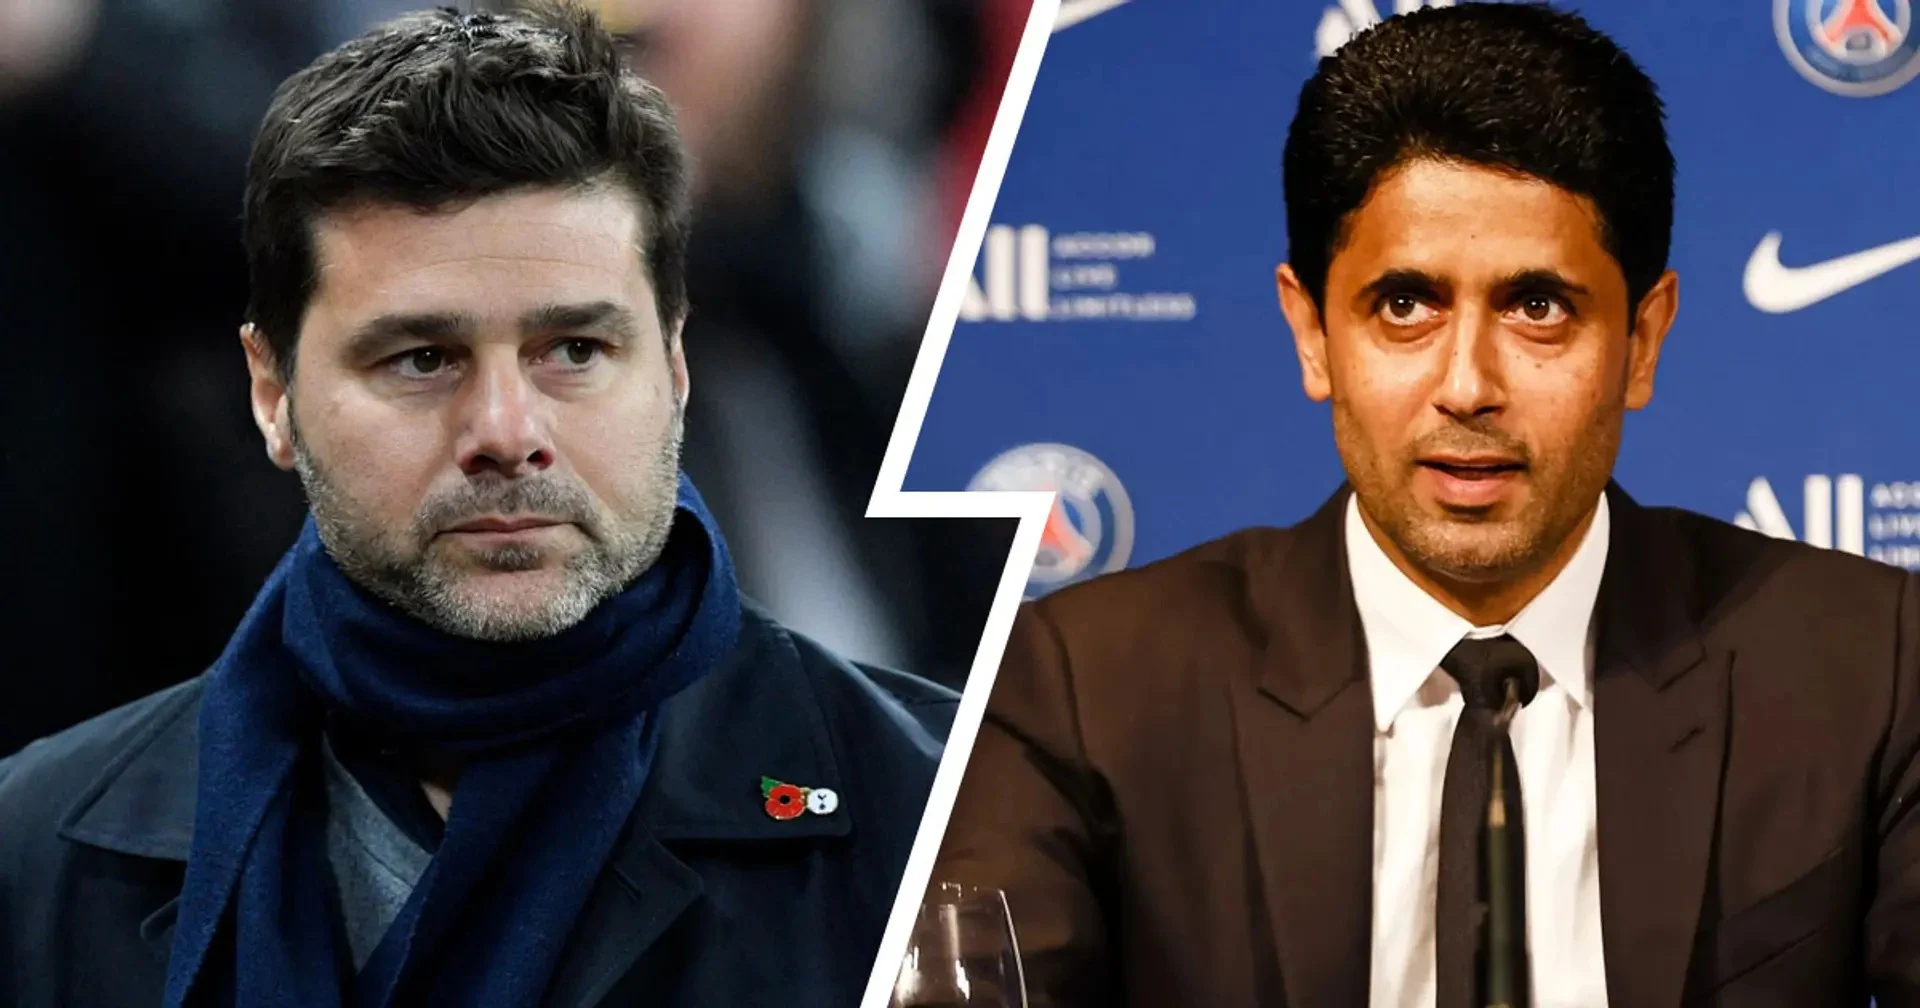 'I think it was very positive': Mauricio Pochettino reflects on his time as PSG manager